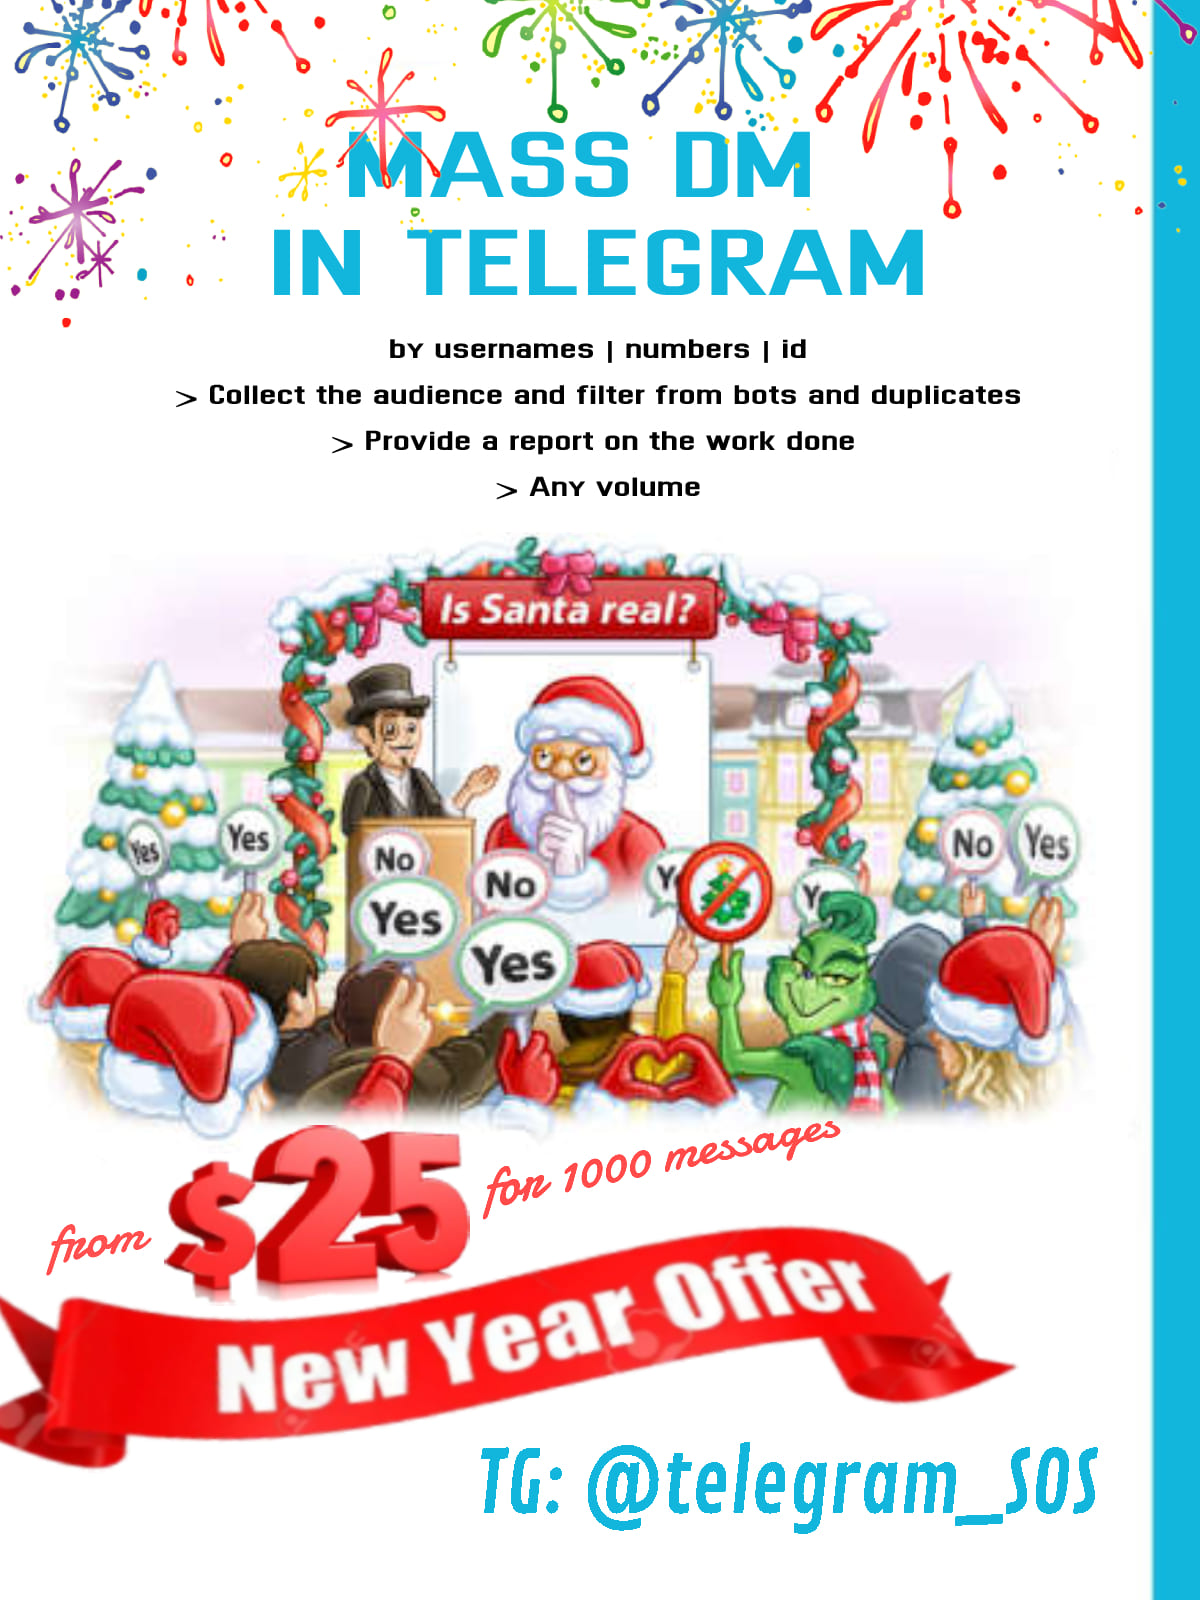 ⭐MASS DM IN TELEGRAM⭐COLLECT THE AUDIENCE AND FILTER FROM BOTS AND DUPLICATES⭐25$ for 1000⭐-dm-jpg